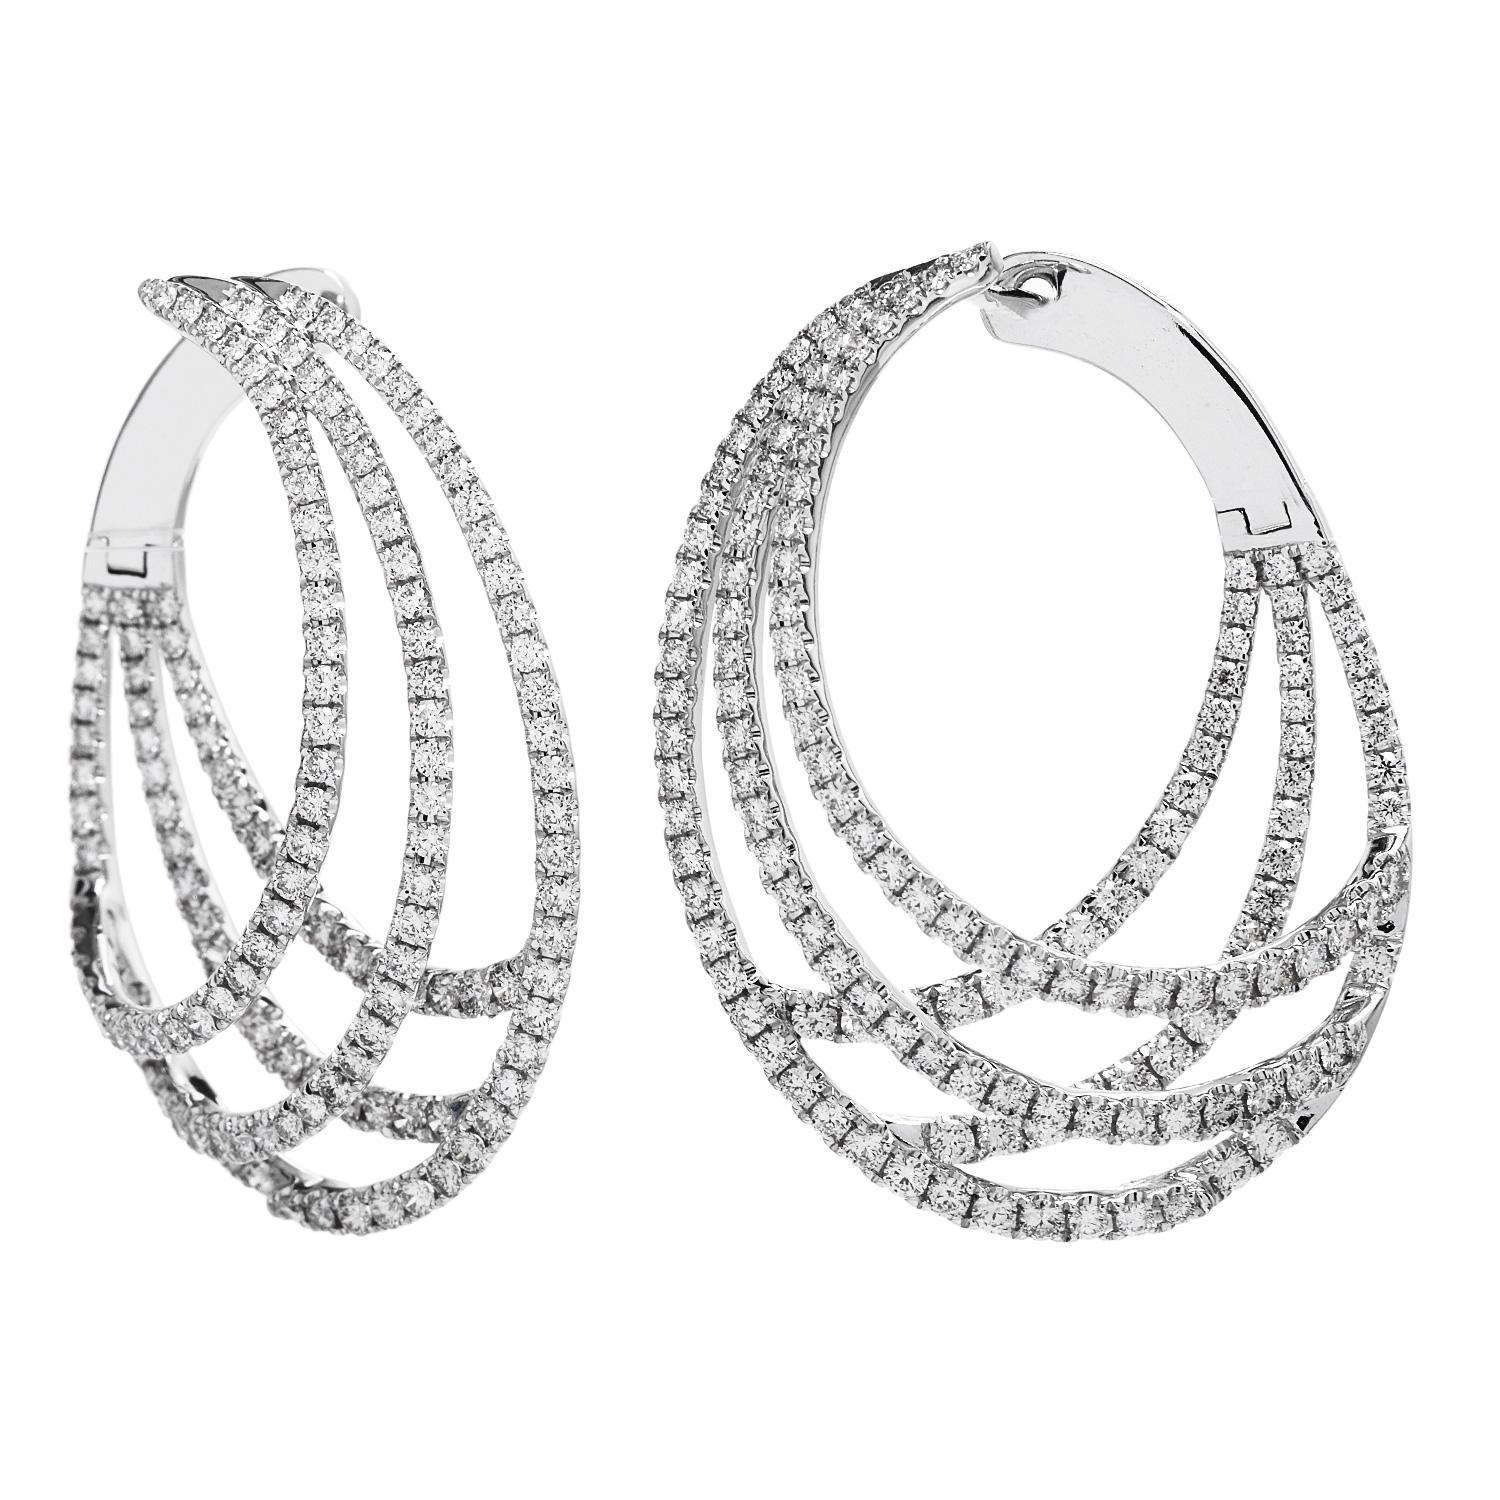 An evening event can be spiced up with the diamond dance of these exquisite hoops. 

 Finely crafted in durable 14K white gold.

These sparkly pieces are decorated from top to bottom with a dance in genuine Diamonds. These hoop earrings are a